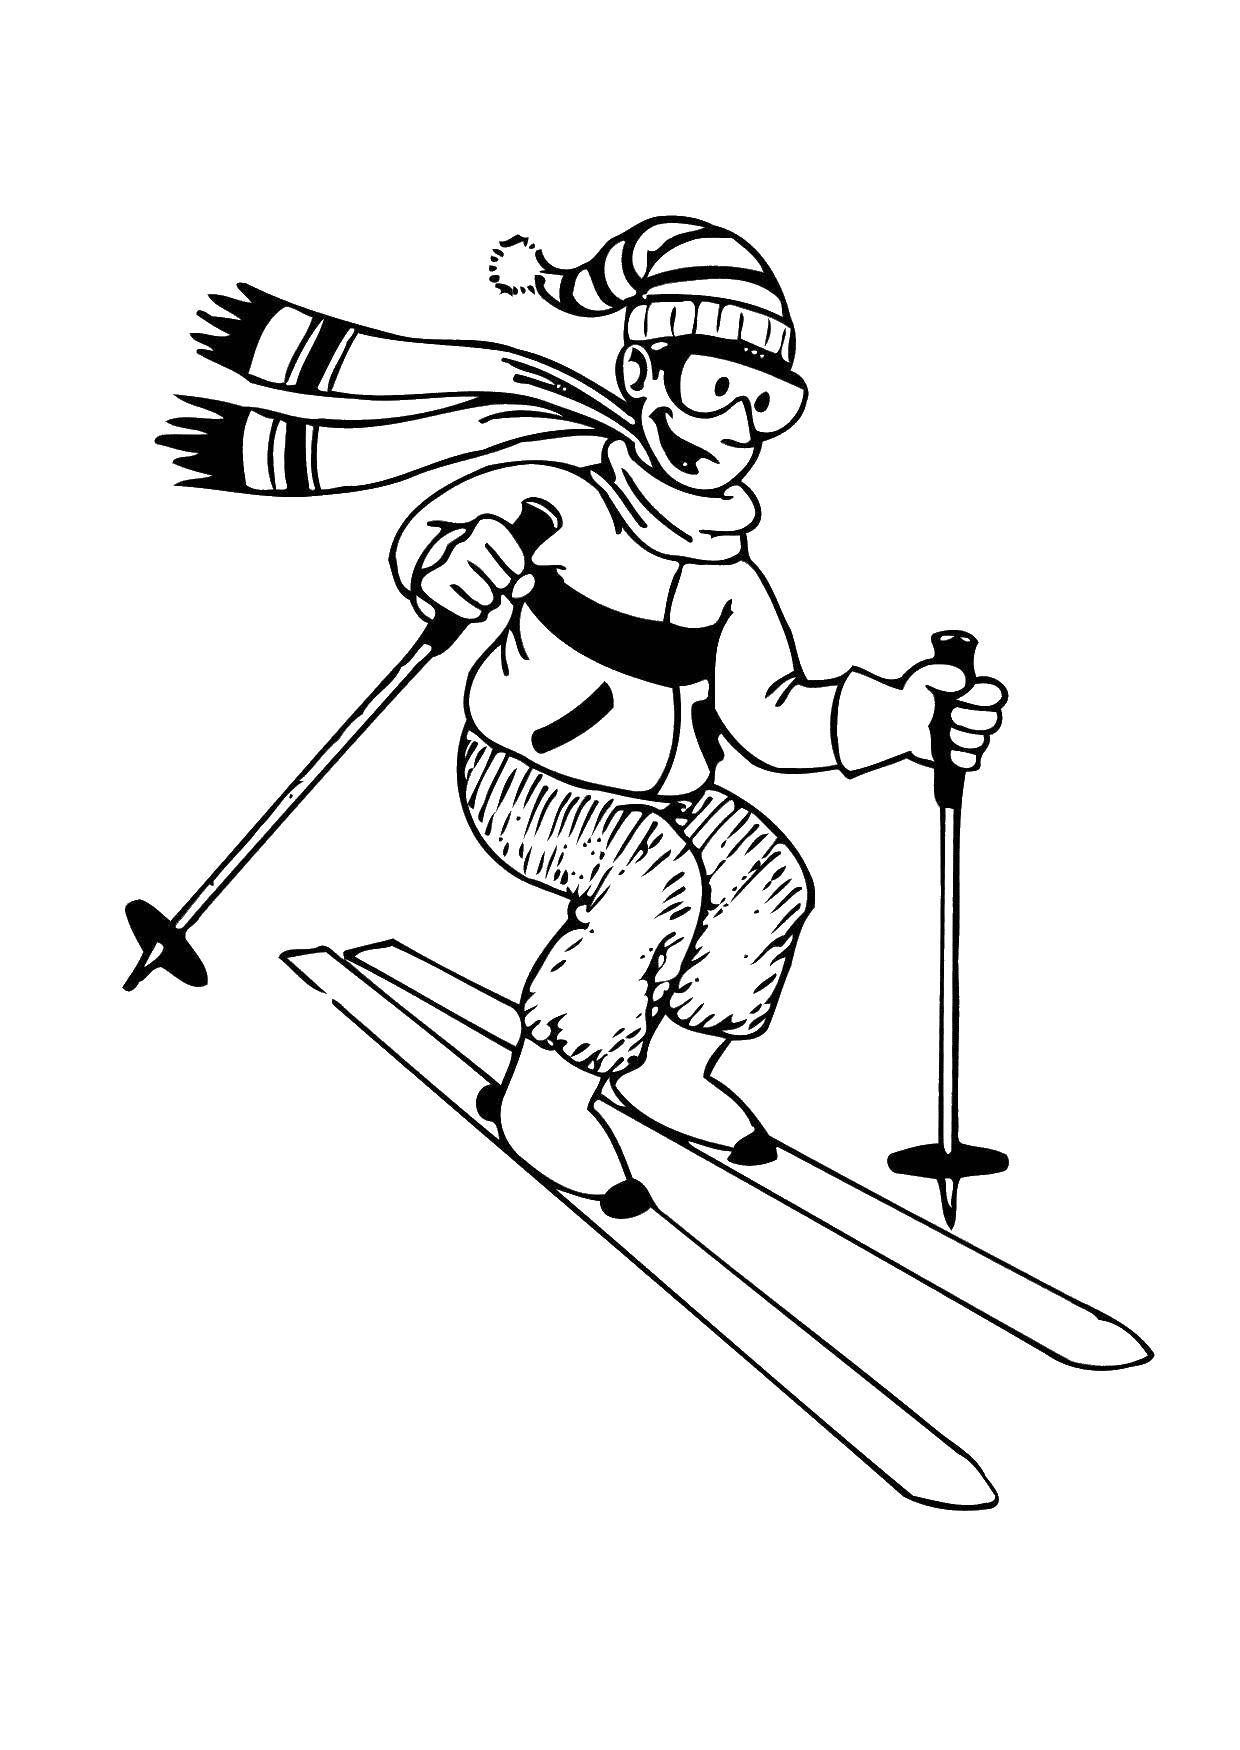 Coloring Skier. Category skiing. Tags:  skier, skiing.